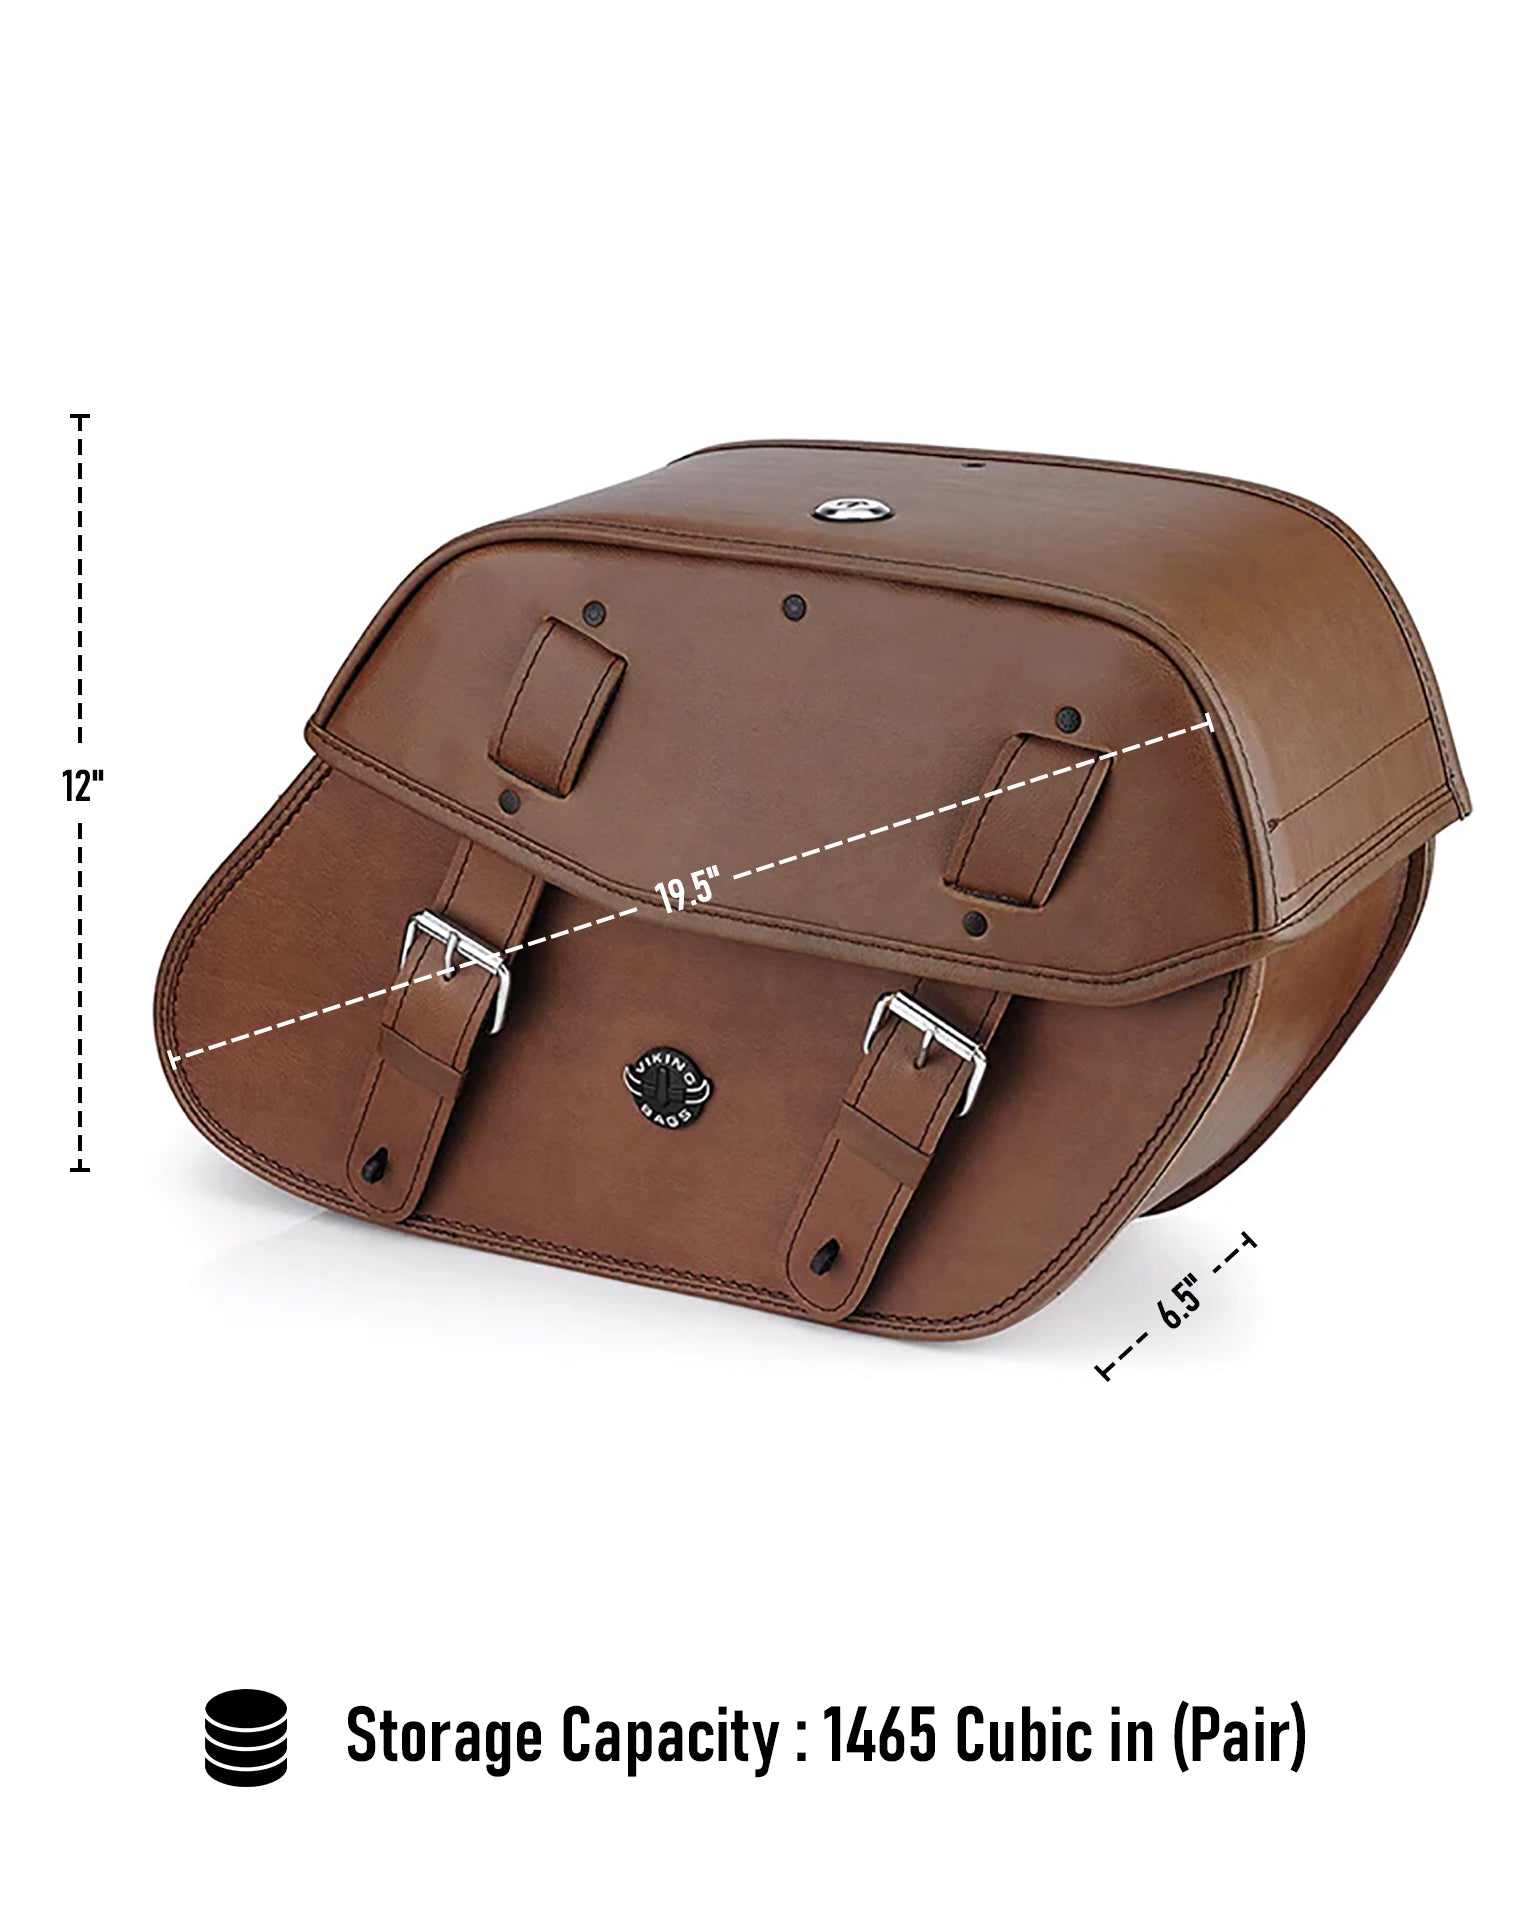 Viking Odin Brown Large Suzuki Boulevard S40 Savage Ls650 Leather Motorcycle Saddlebags Can Store Your Ridings Gears